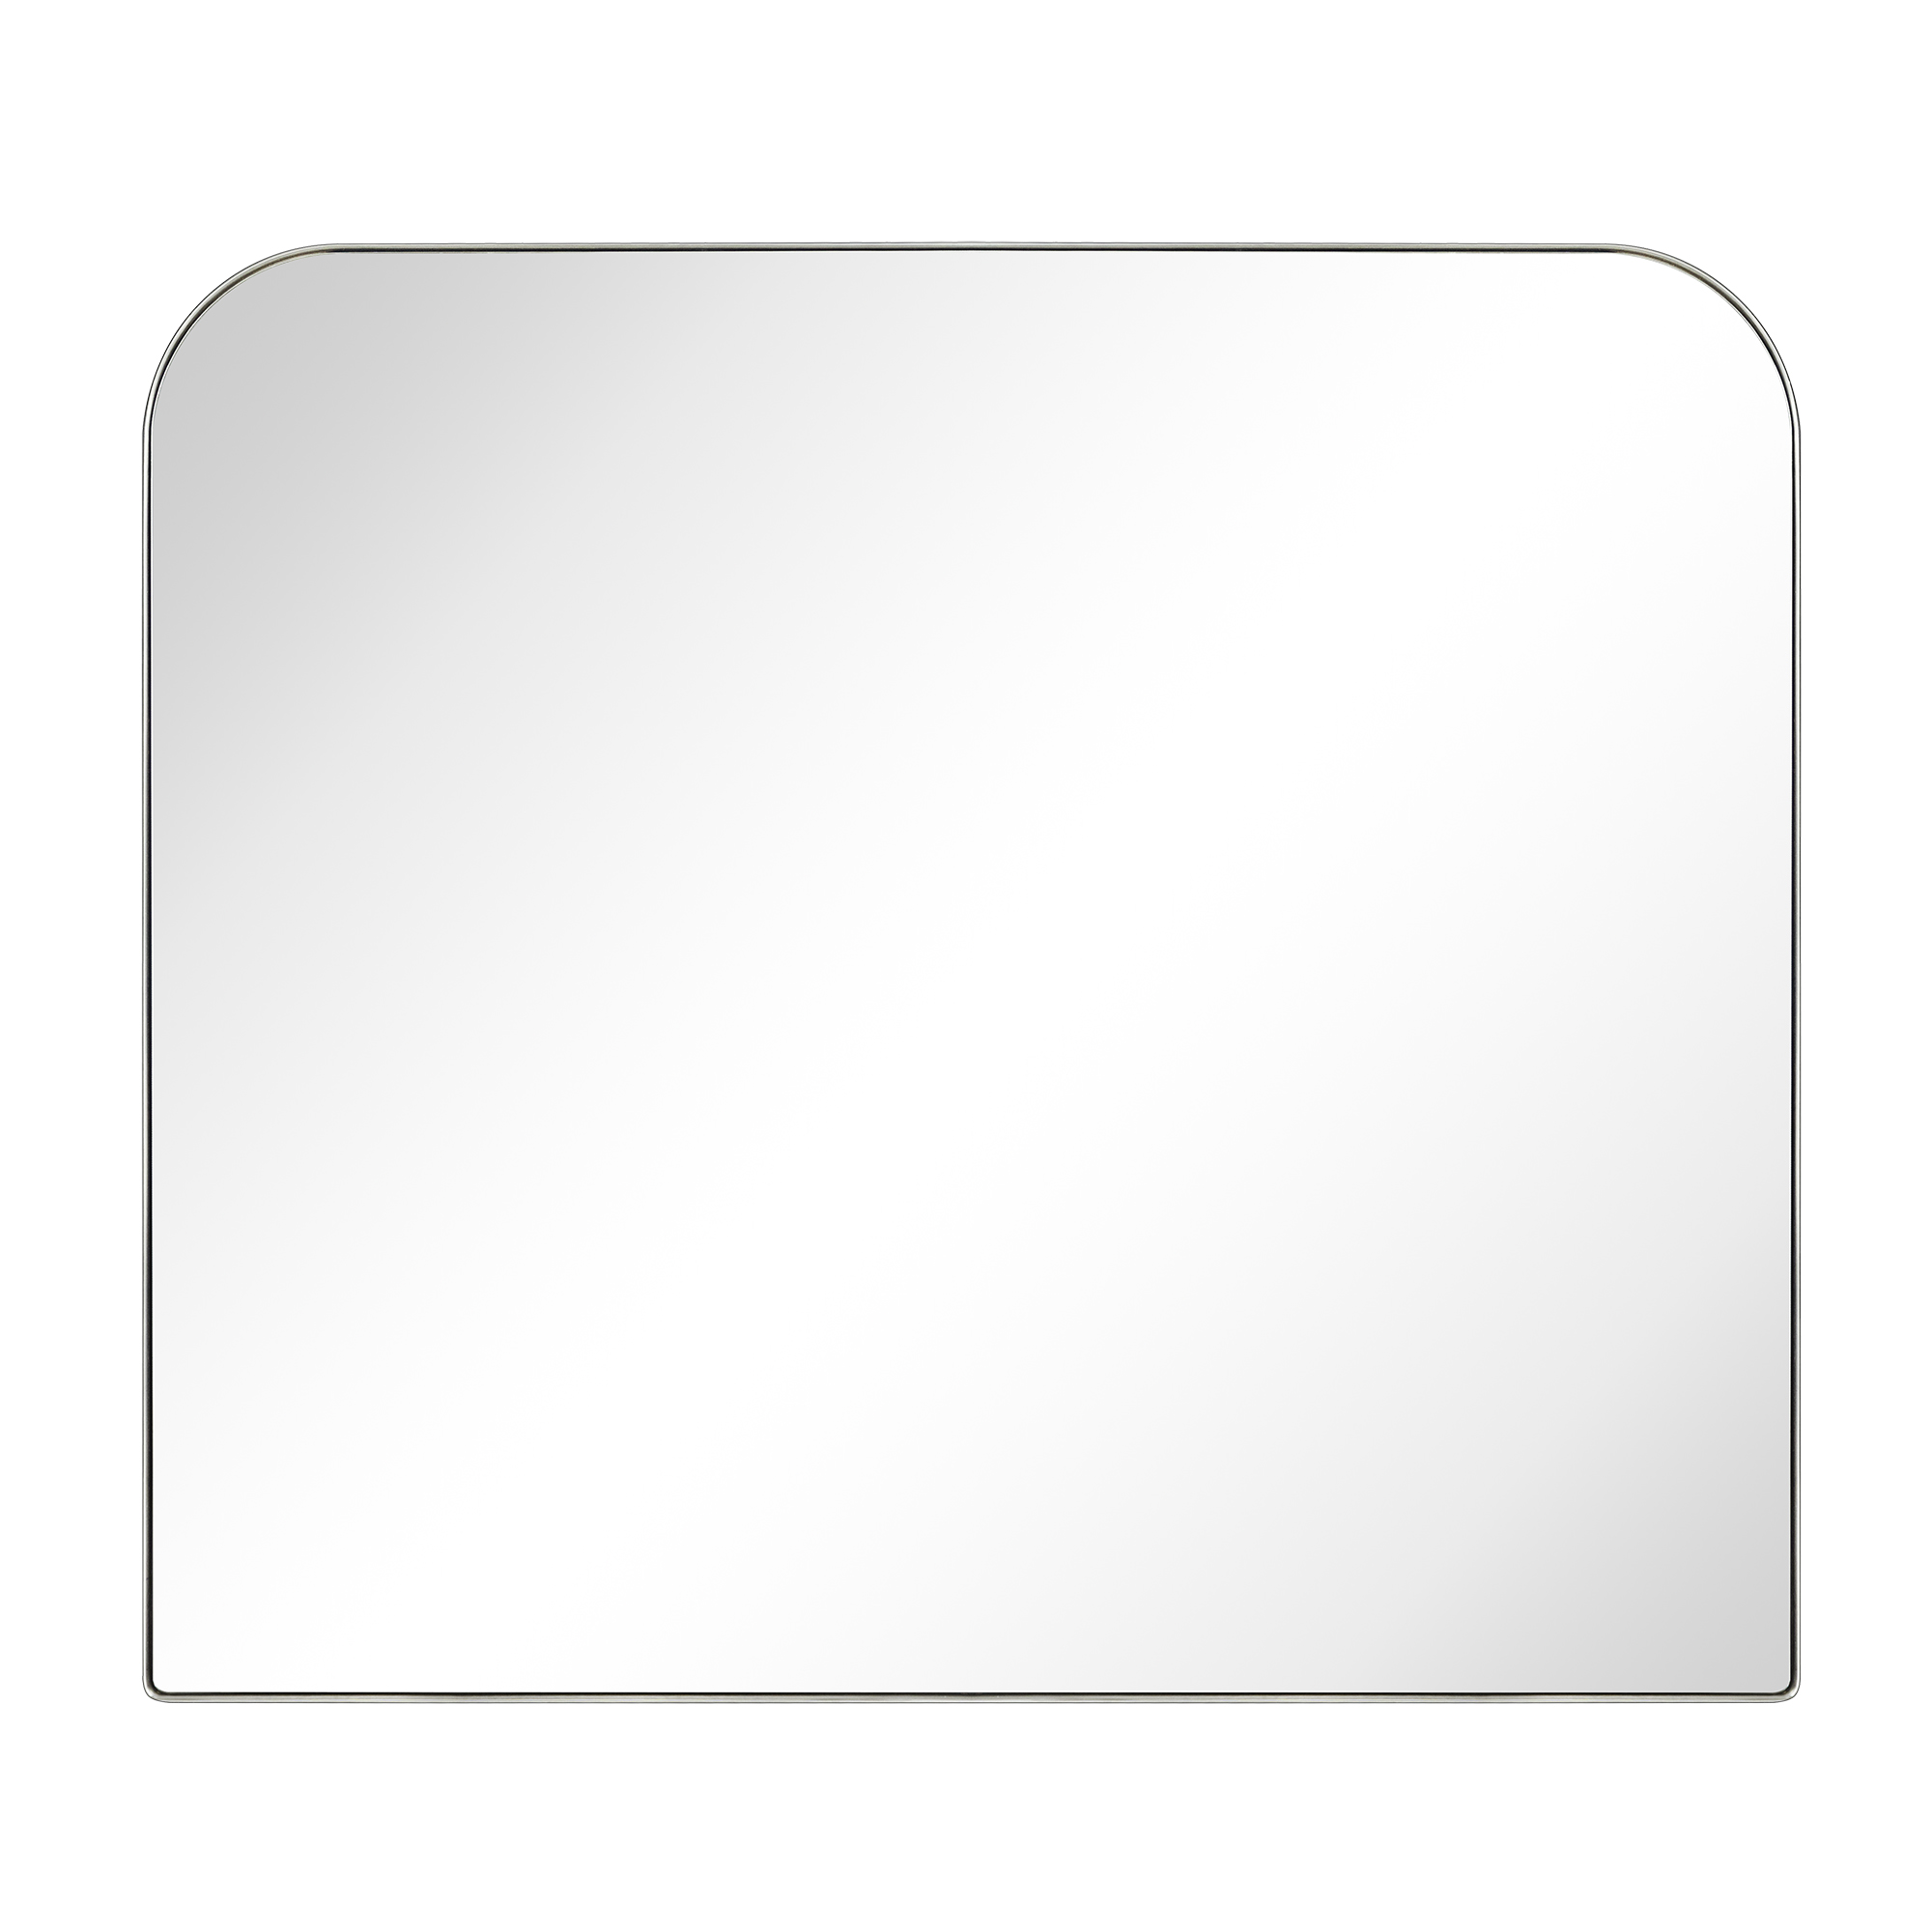 Decole Arch Metal Wall Mirror-34x40-Brushed Nickel